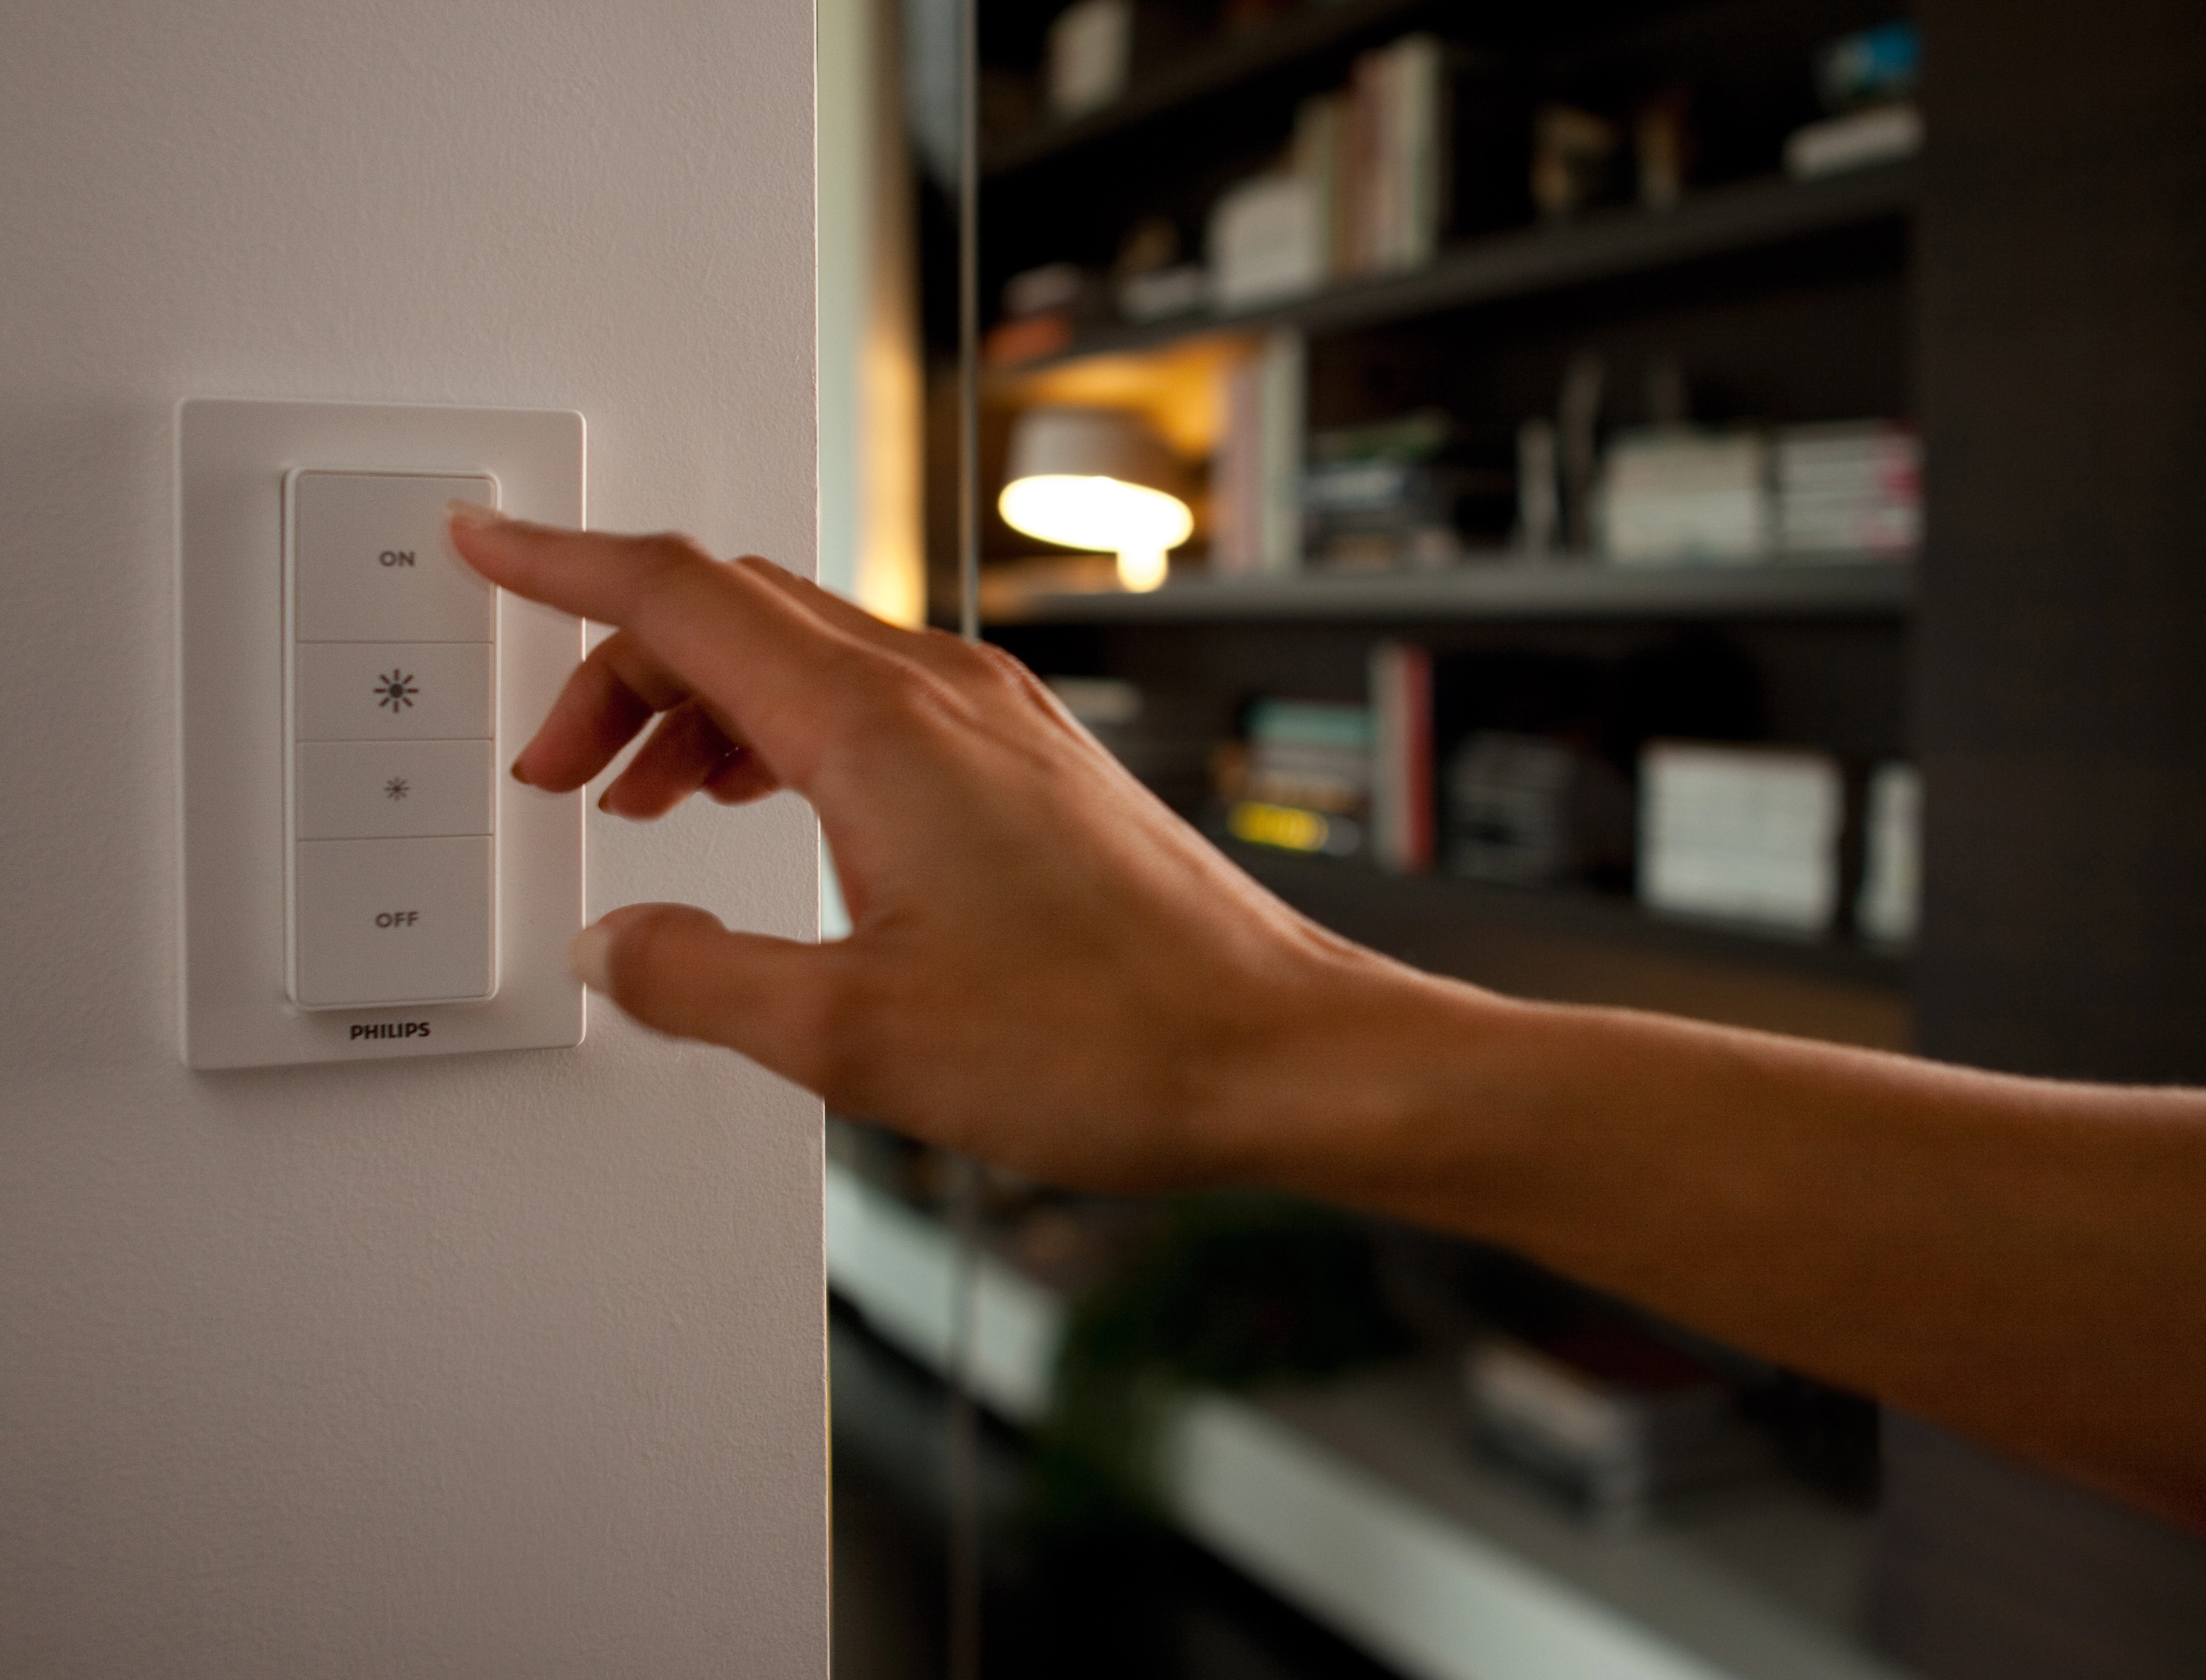 Explore Ambiance LED-Pendelleuchte Philips Hue White Weiß inkl. Dimmer